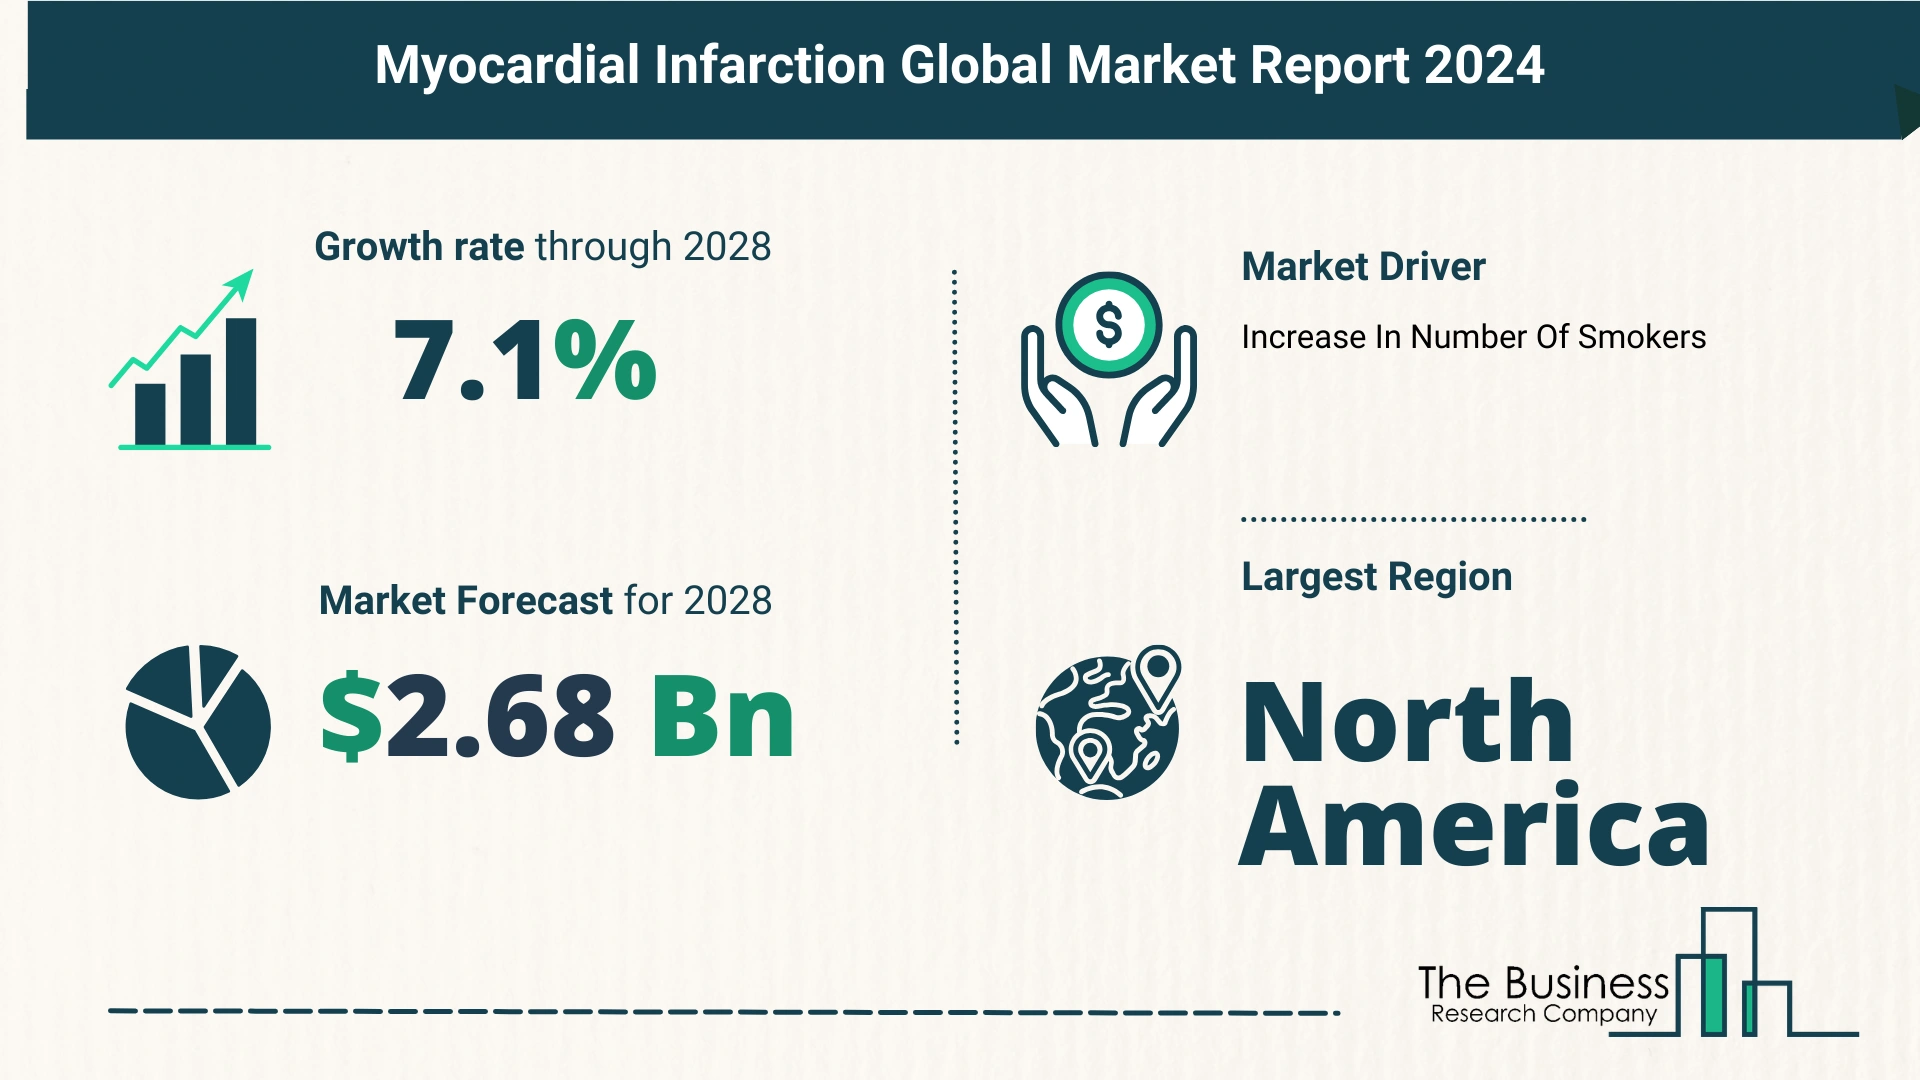 What Is The Forecast Growth Rate For The Myocardial Infarction Market?